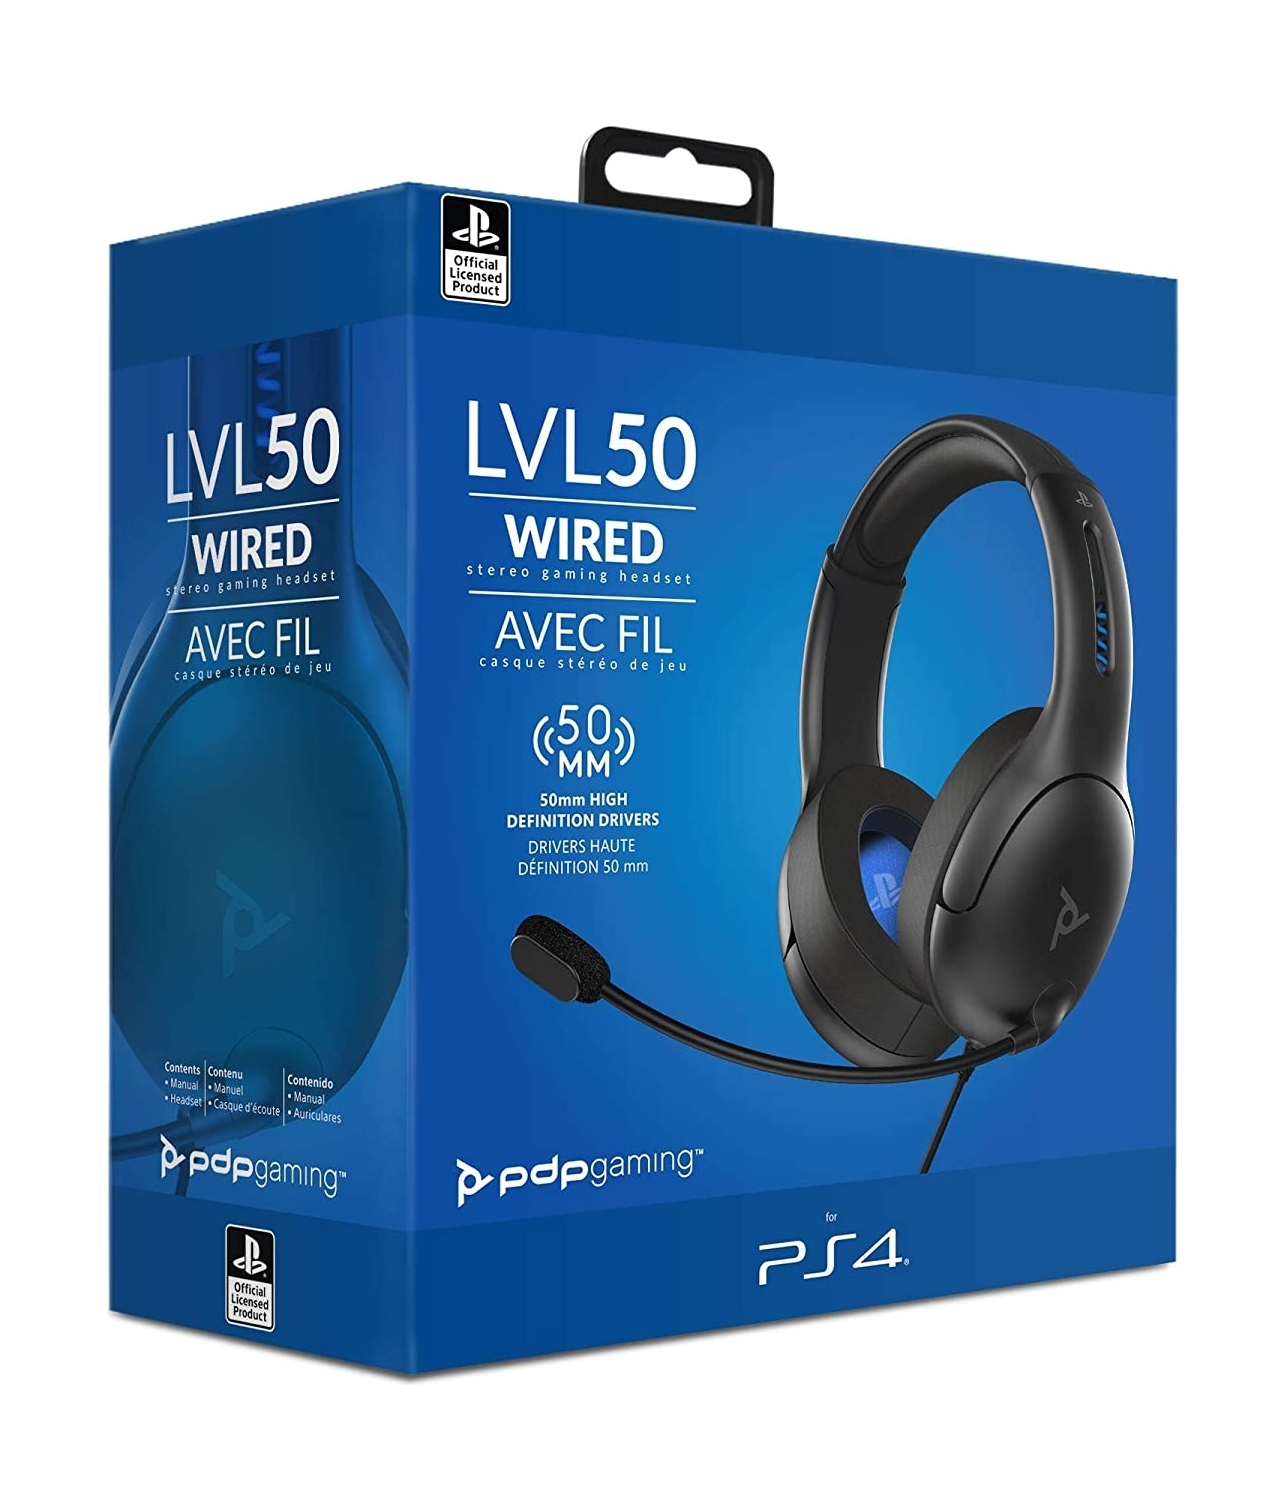 Buy Pdp ps4 lvl50 wired stereo gaming headset - black in Saudi Arabia